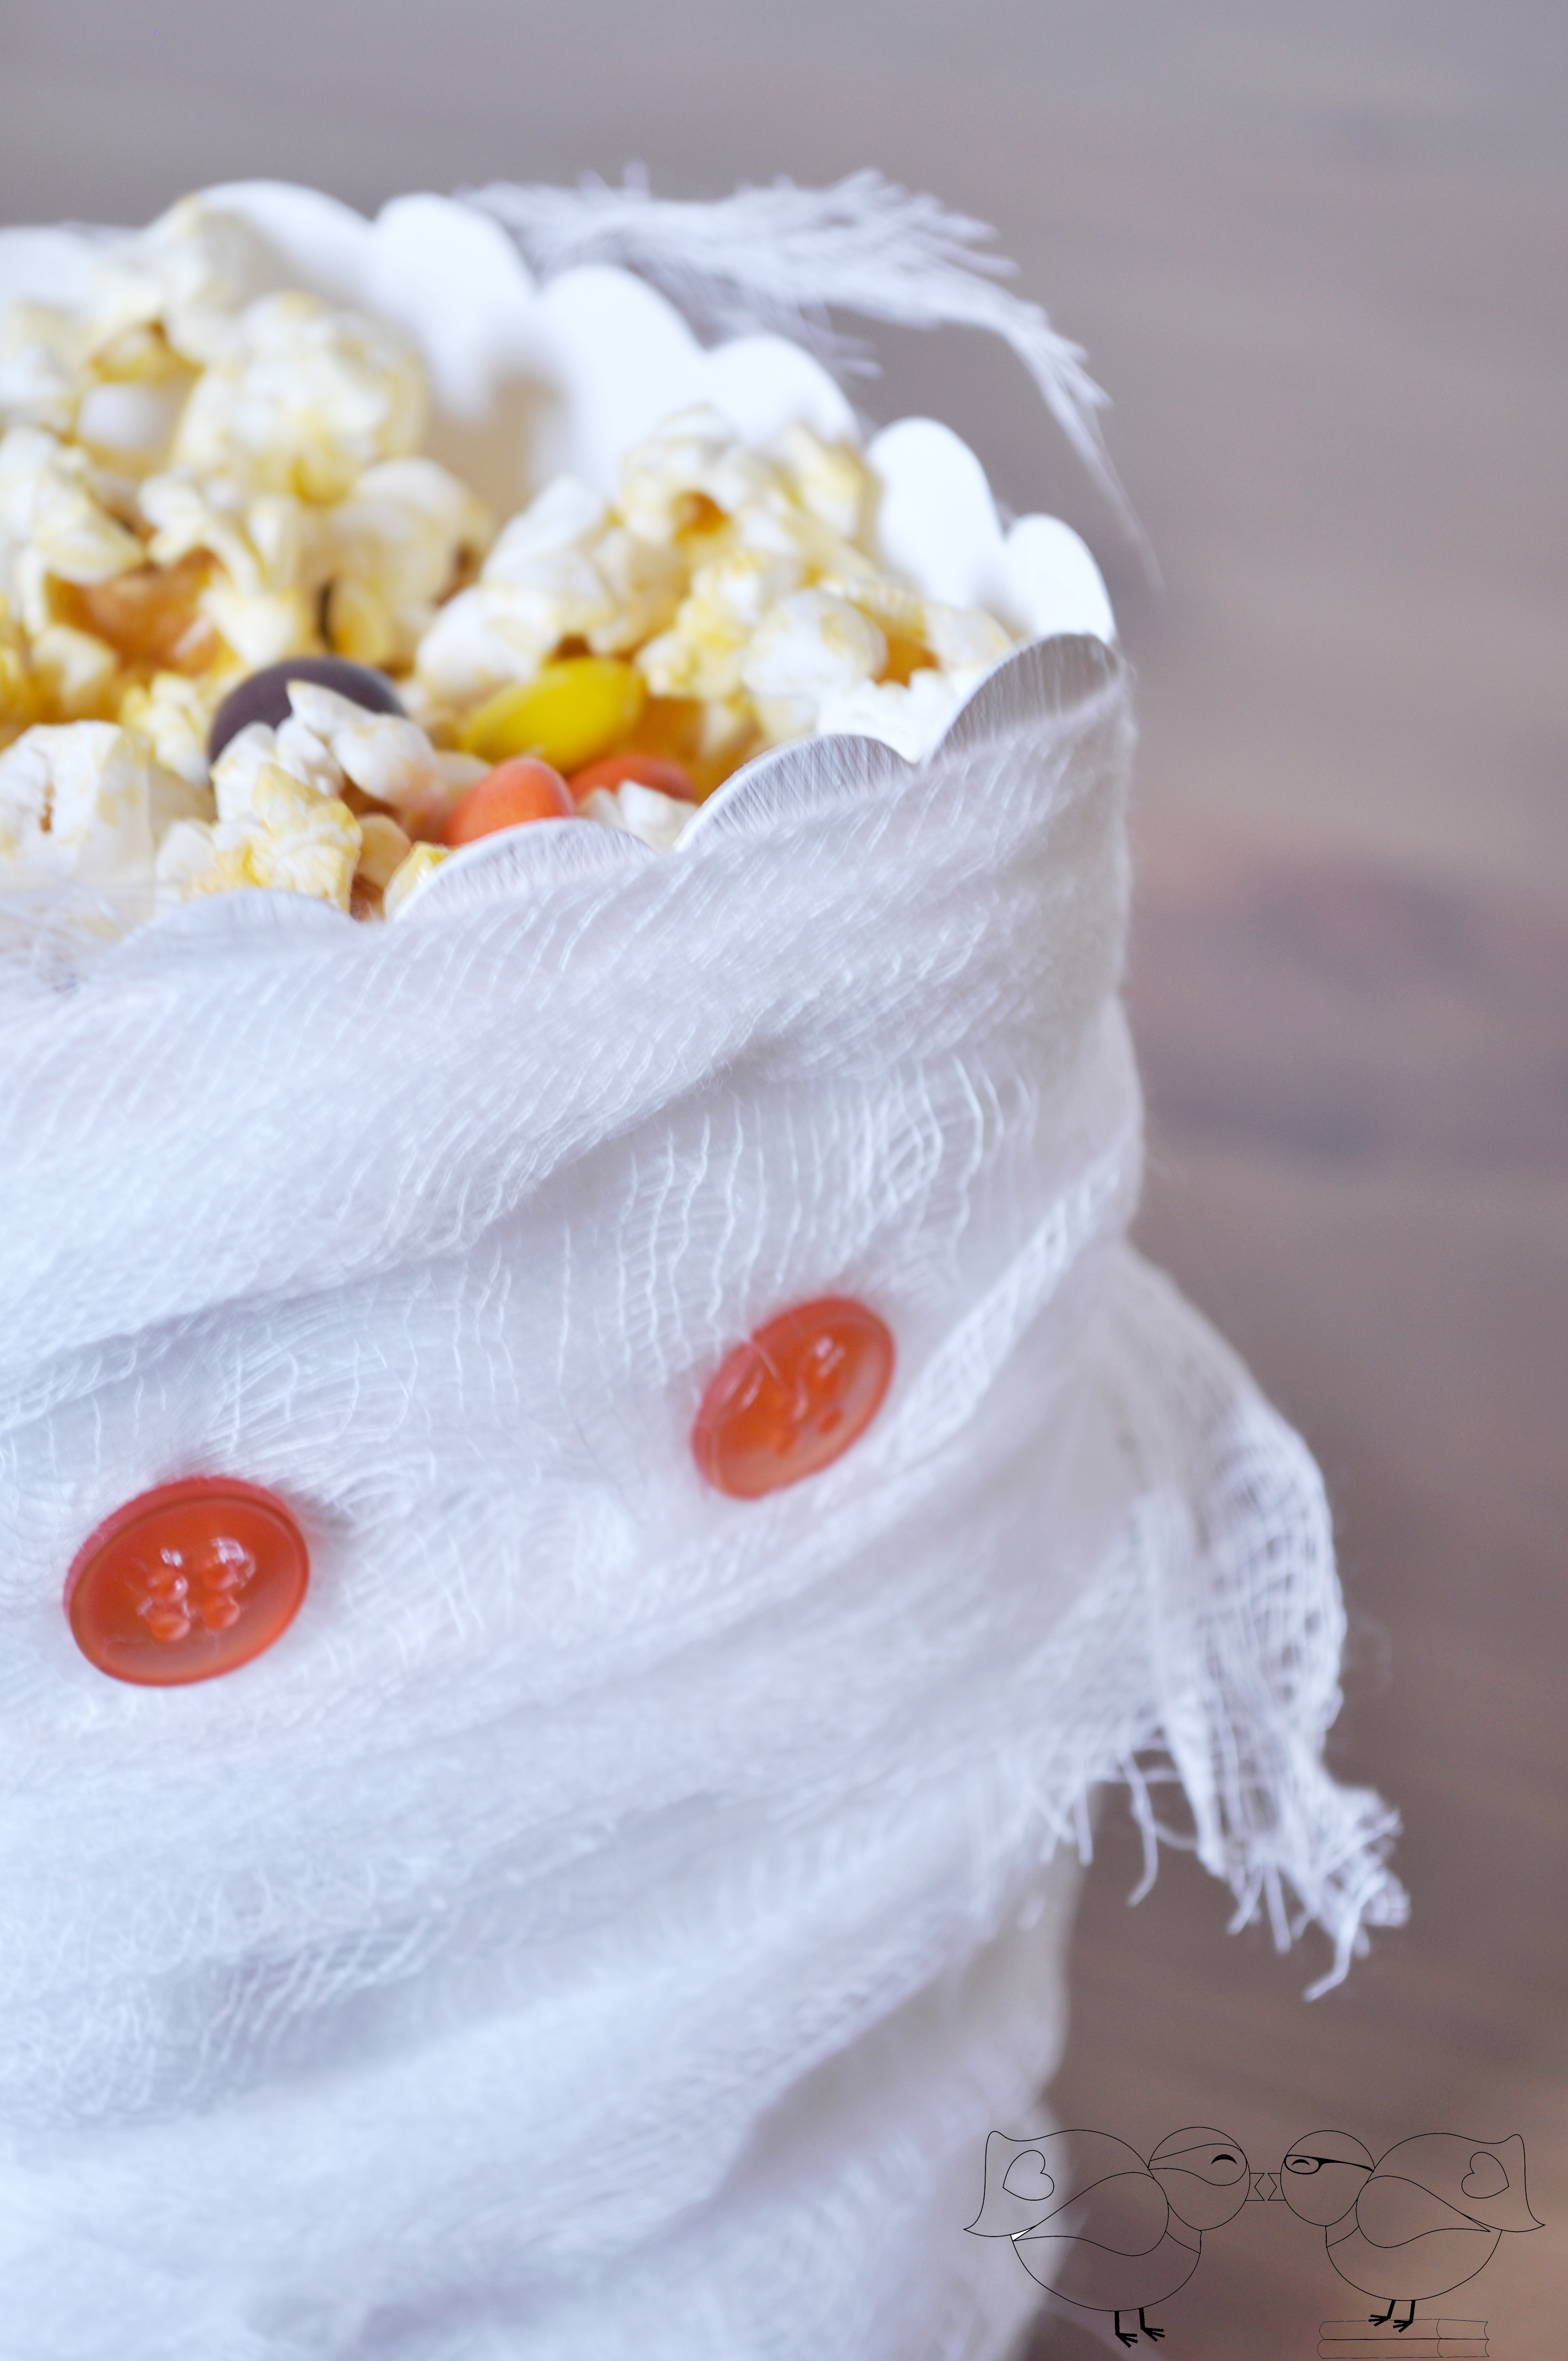 Up-cycle a popcorn box into a Halloween Favor Box. Dressed up as a mummy, it is the perfect addition to your Halloween Party! @ The Love Nerds {https://thelovenerds.com}